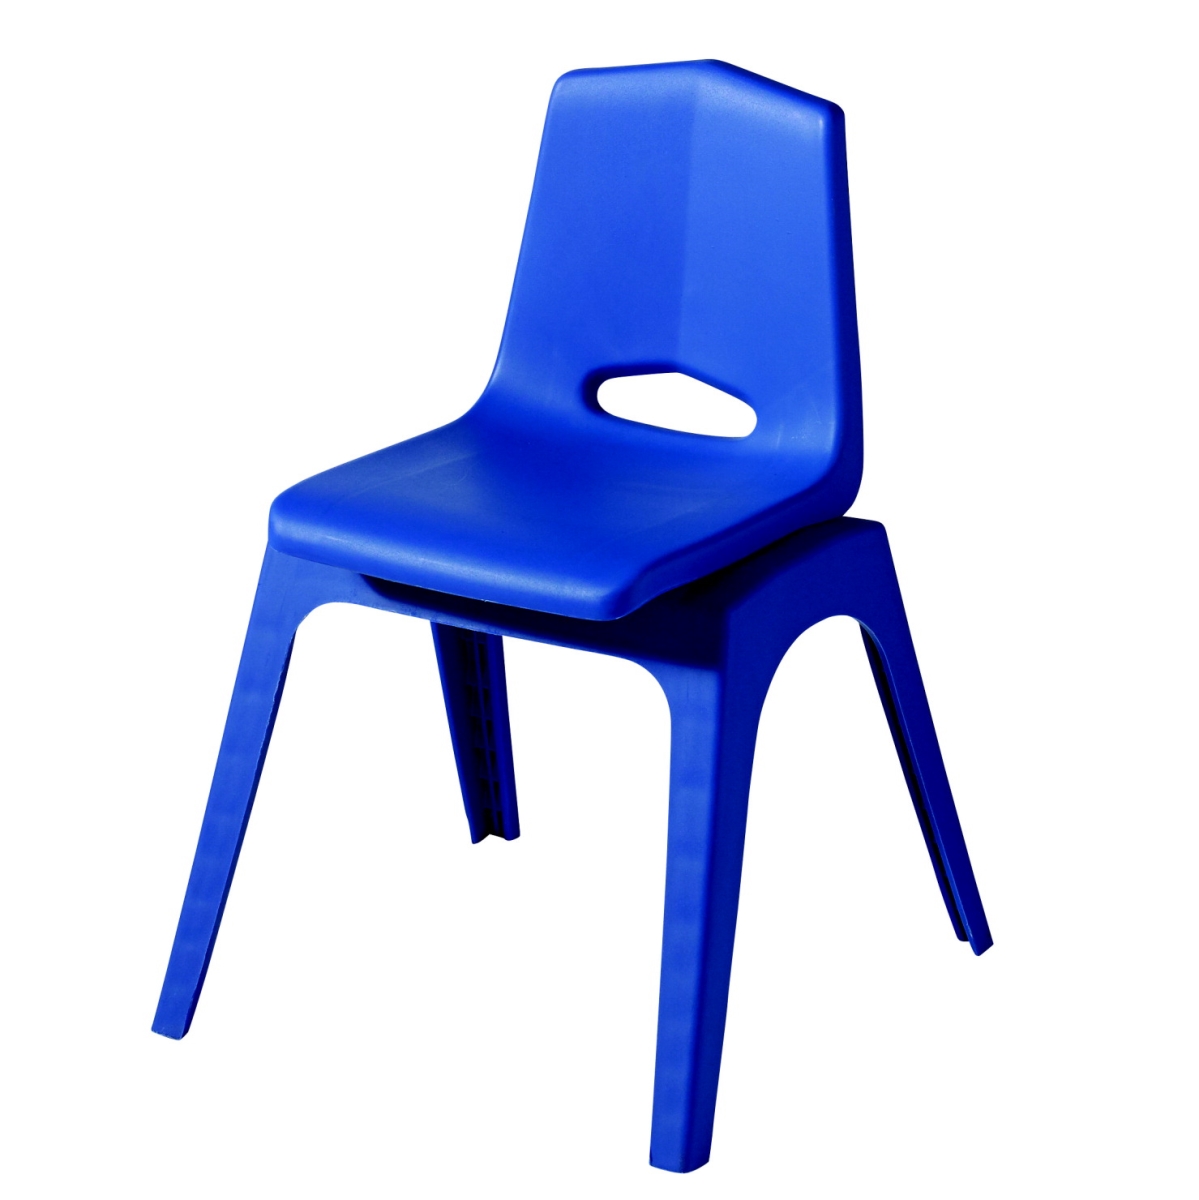 Affordable Interior Systems 1516586 Royal Prima Stack 12 In. Stock Royal Blue Seat & Plastic Leg Color Chair